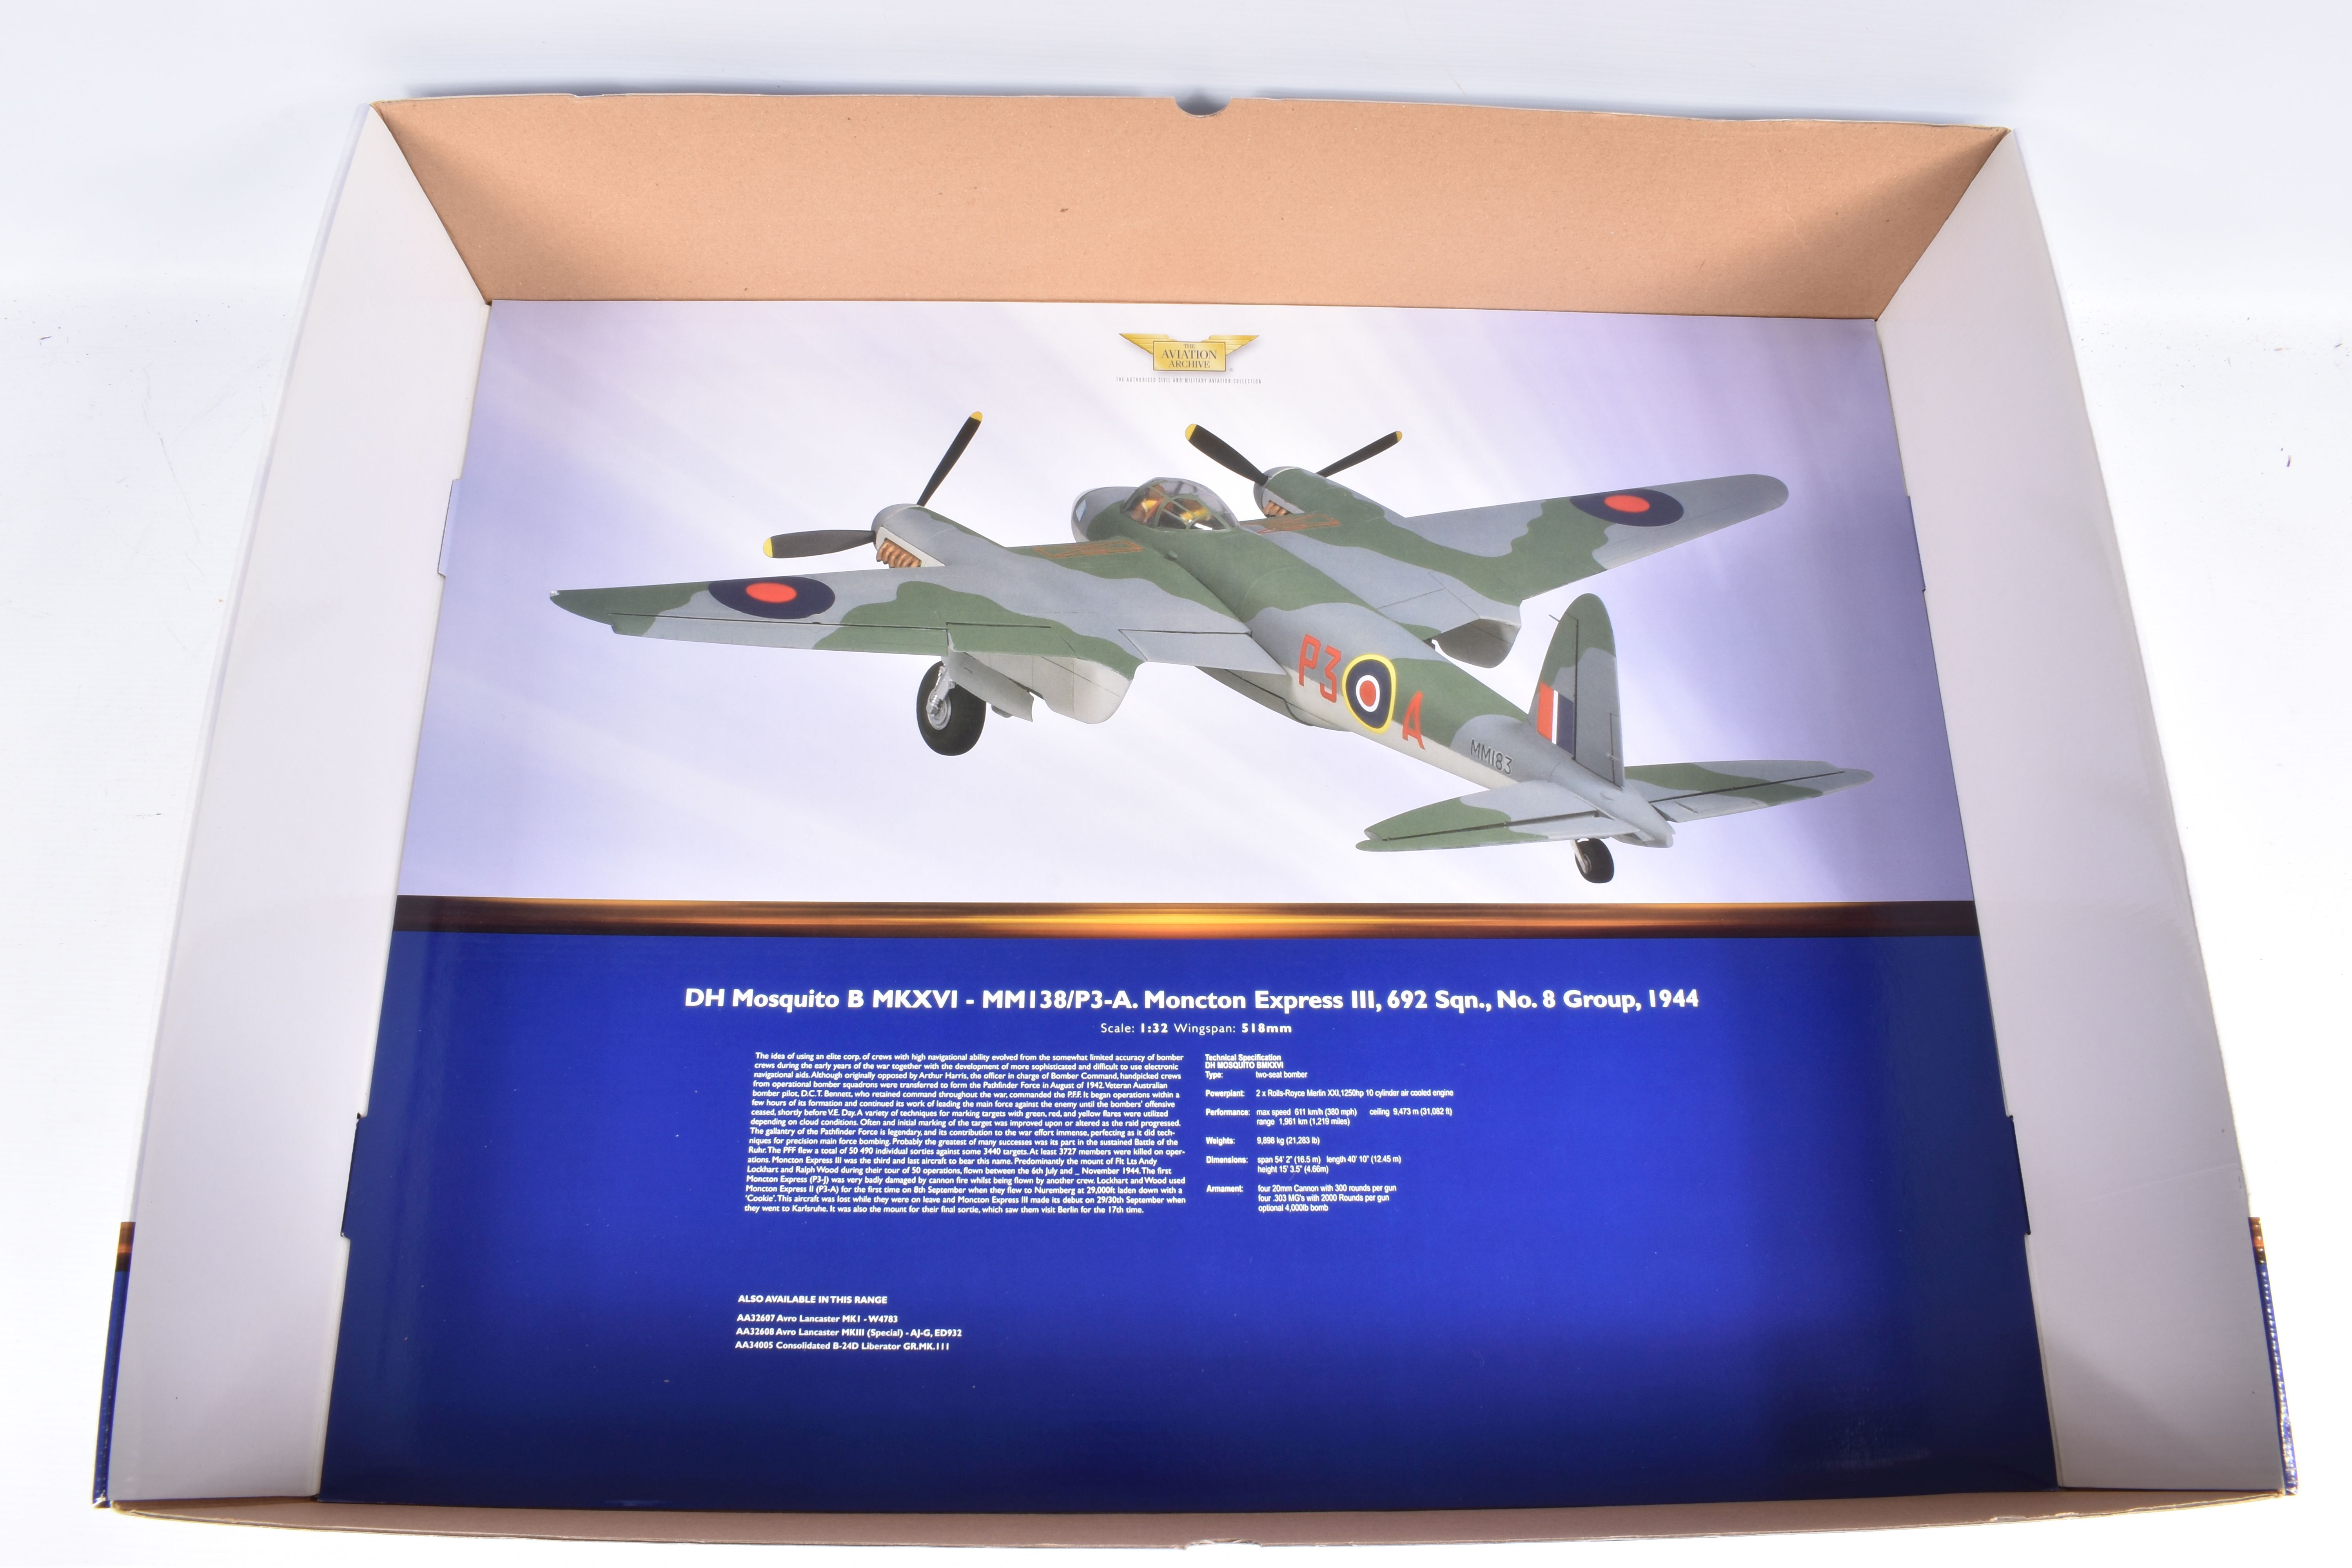 A BOXED LIMITED EDITION CORGI AVIATION ARCHIVE WORLD WAR II BOMBERS ON THE HORIZON DH MOSQUITO B - Image 2 of 4